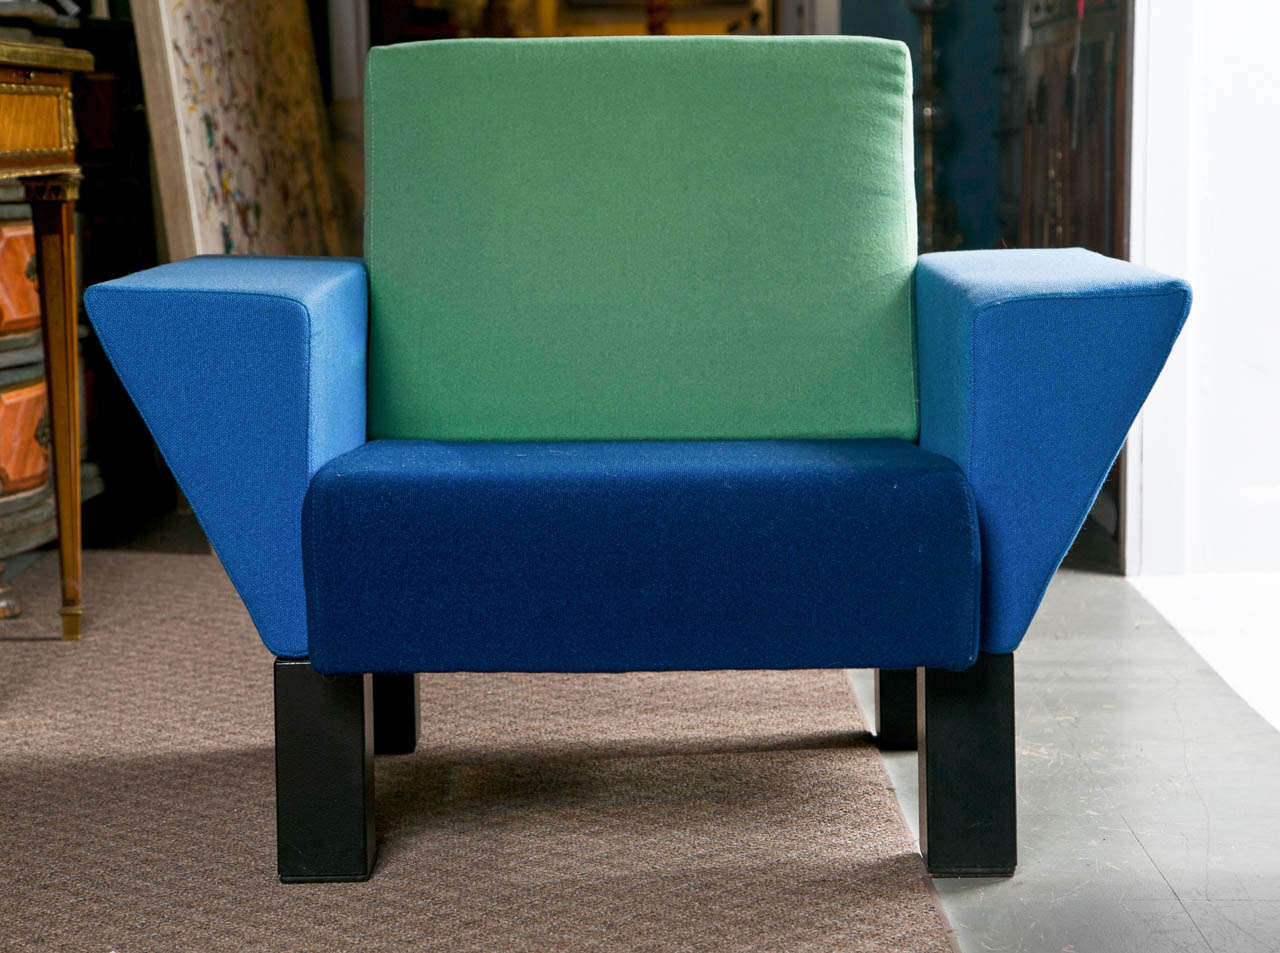 Pair of Westside Memphis chairs by Ettore Sotsass. Made by Knoll Internationall 1982/83. Fabric reminiscent Dutch De Stijl movements.